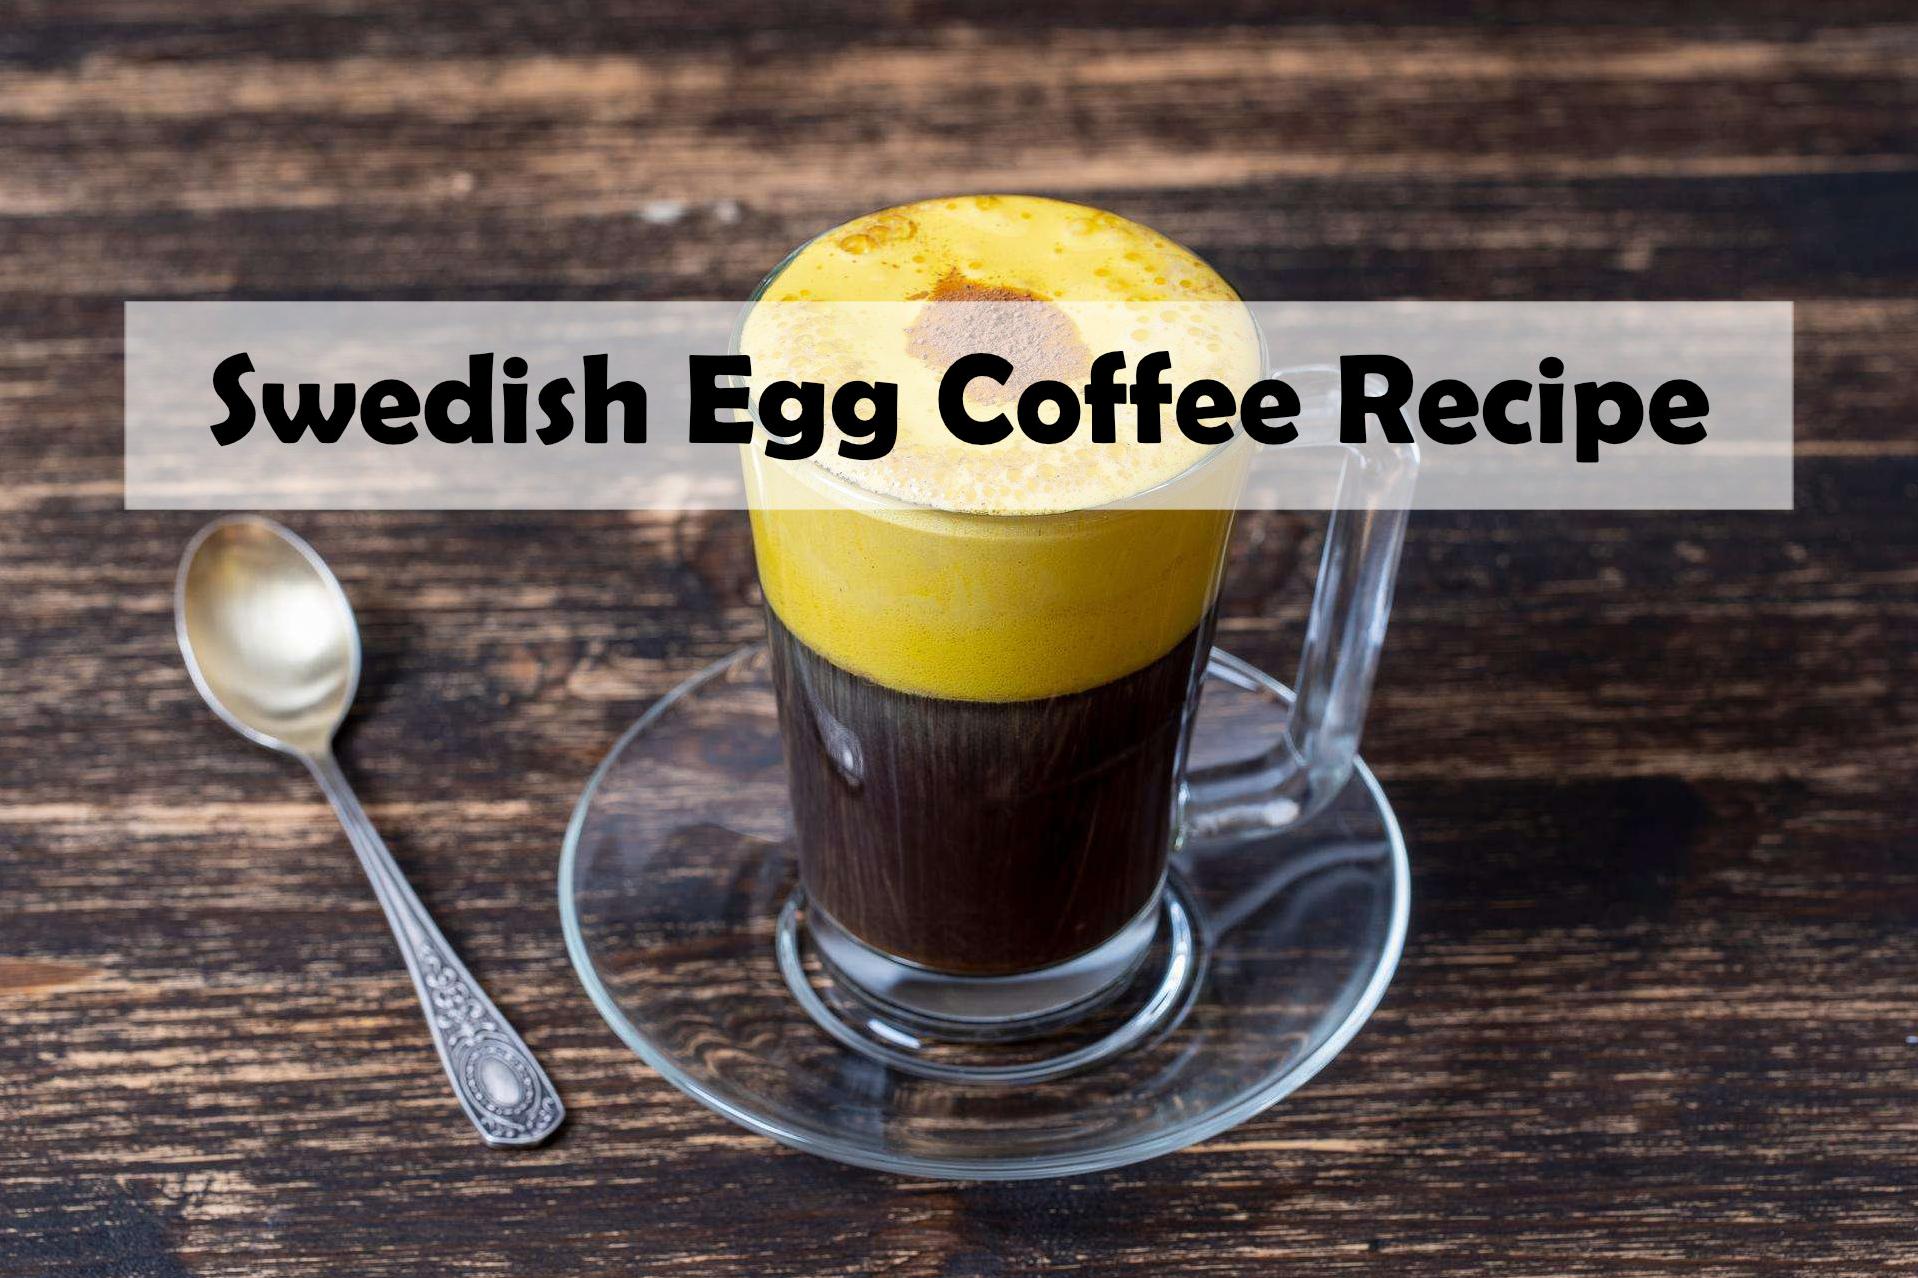  The aroma of fresh-brewed coffee combined with the sweetness of egg makes for a delightful morning treat.